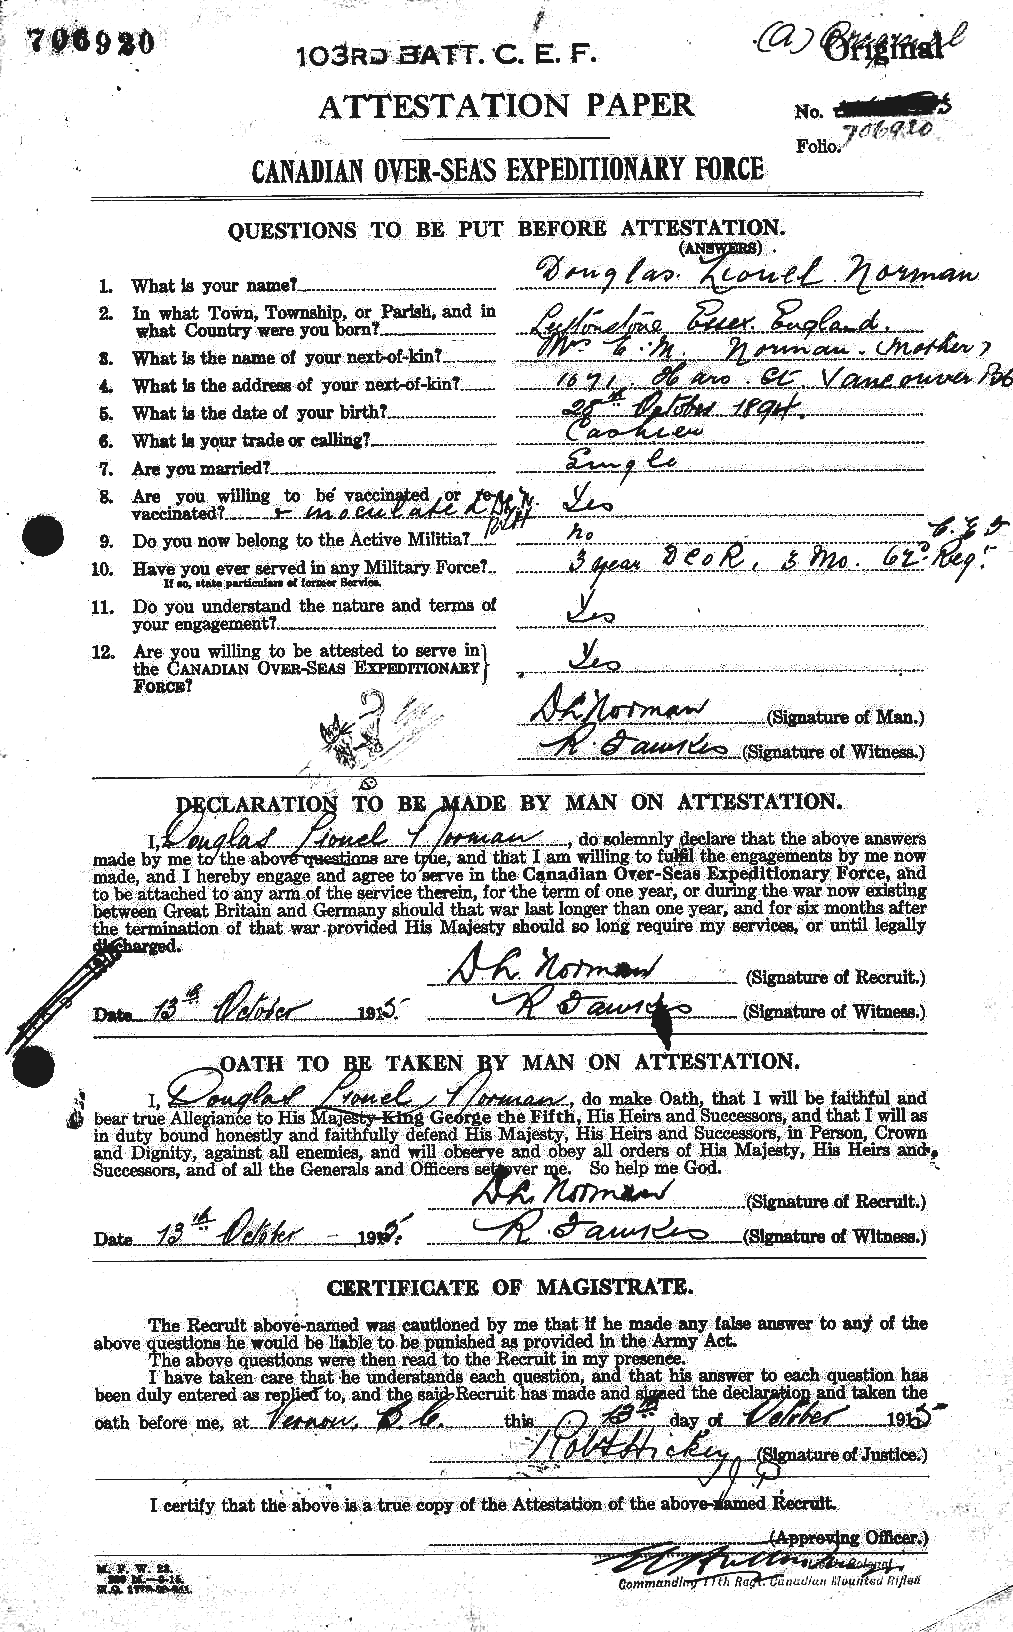 Personnel Records of the First World War - CEF 552070a